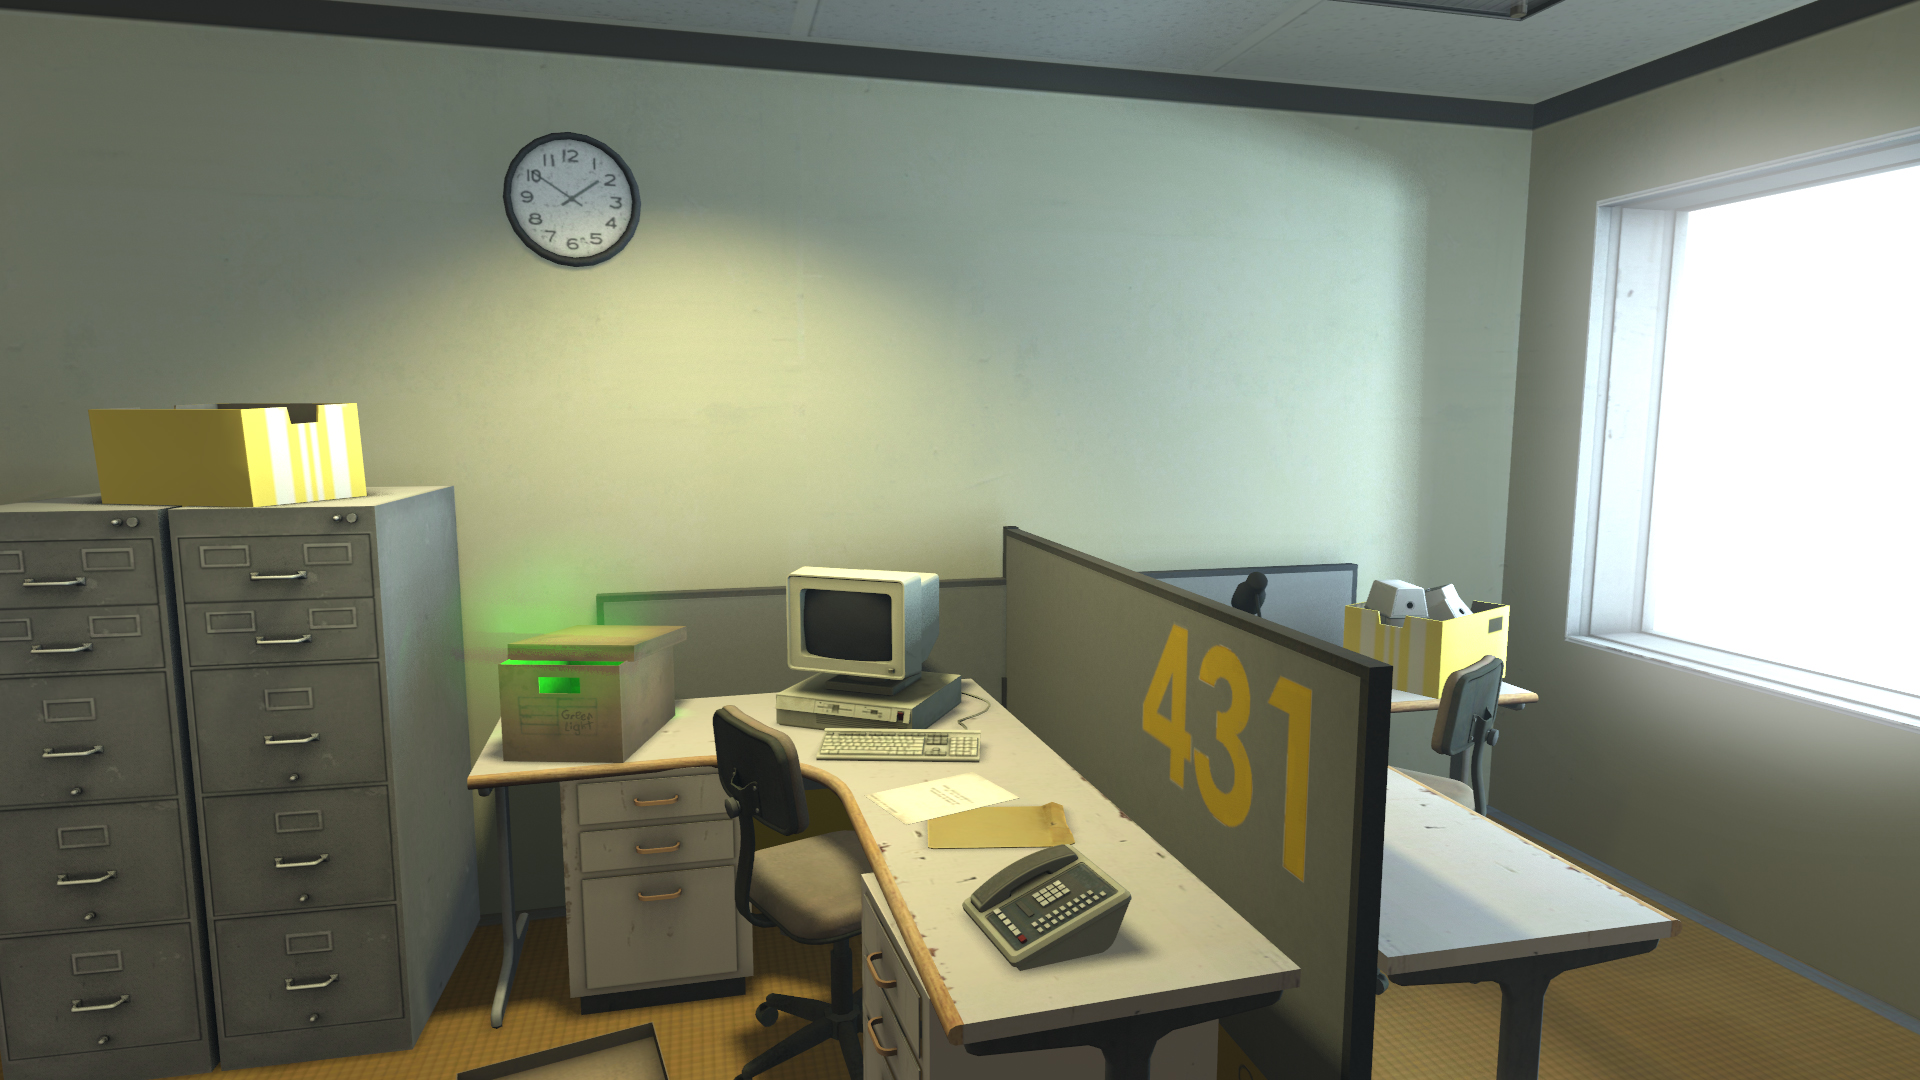 the stanley parable ultra deluxe release date pc